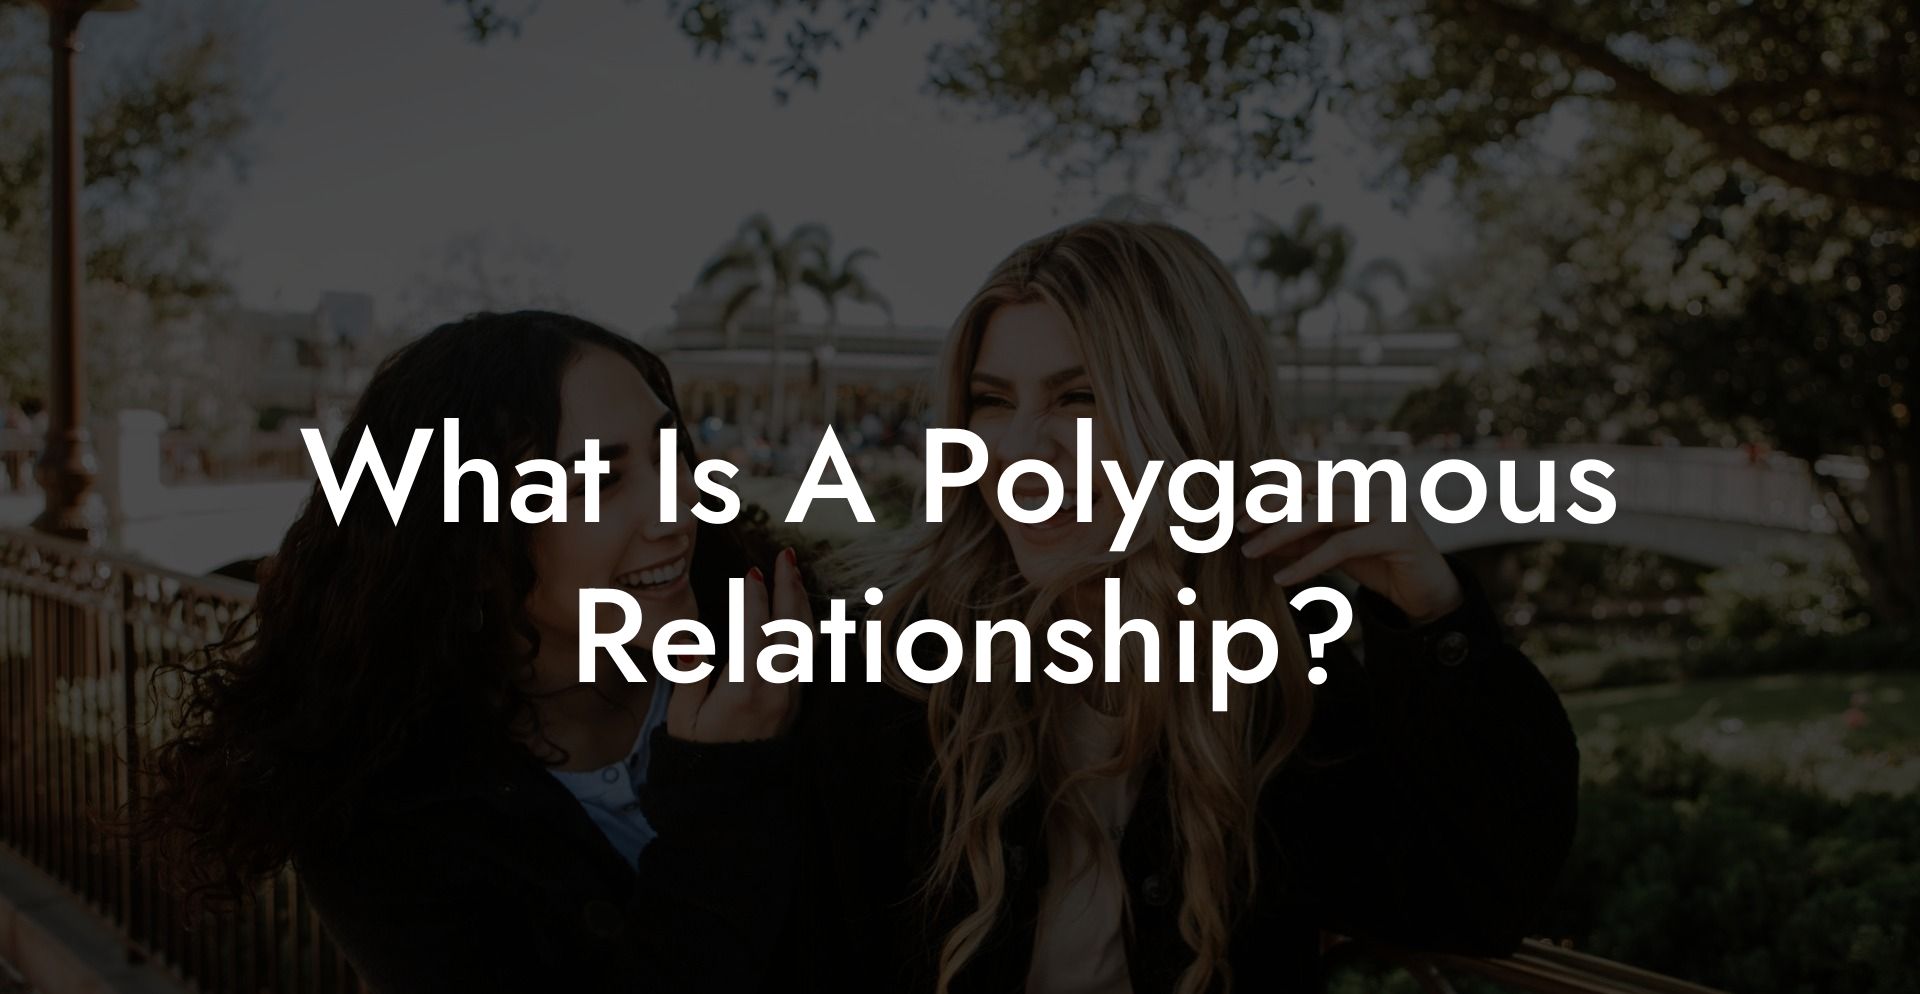 What Is A Polygamous Relationship?